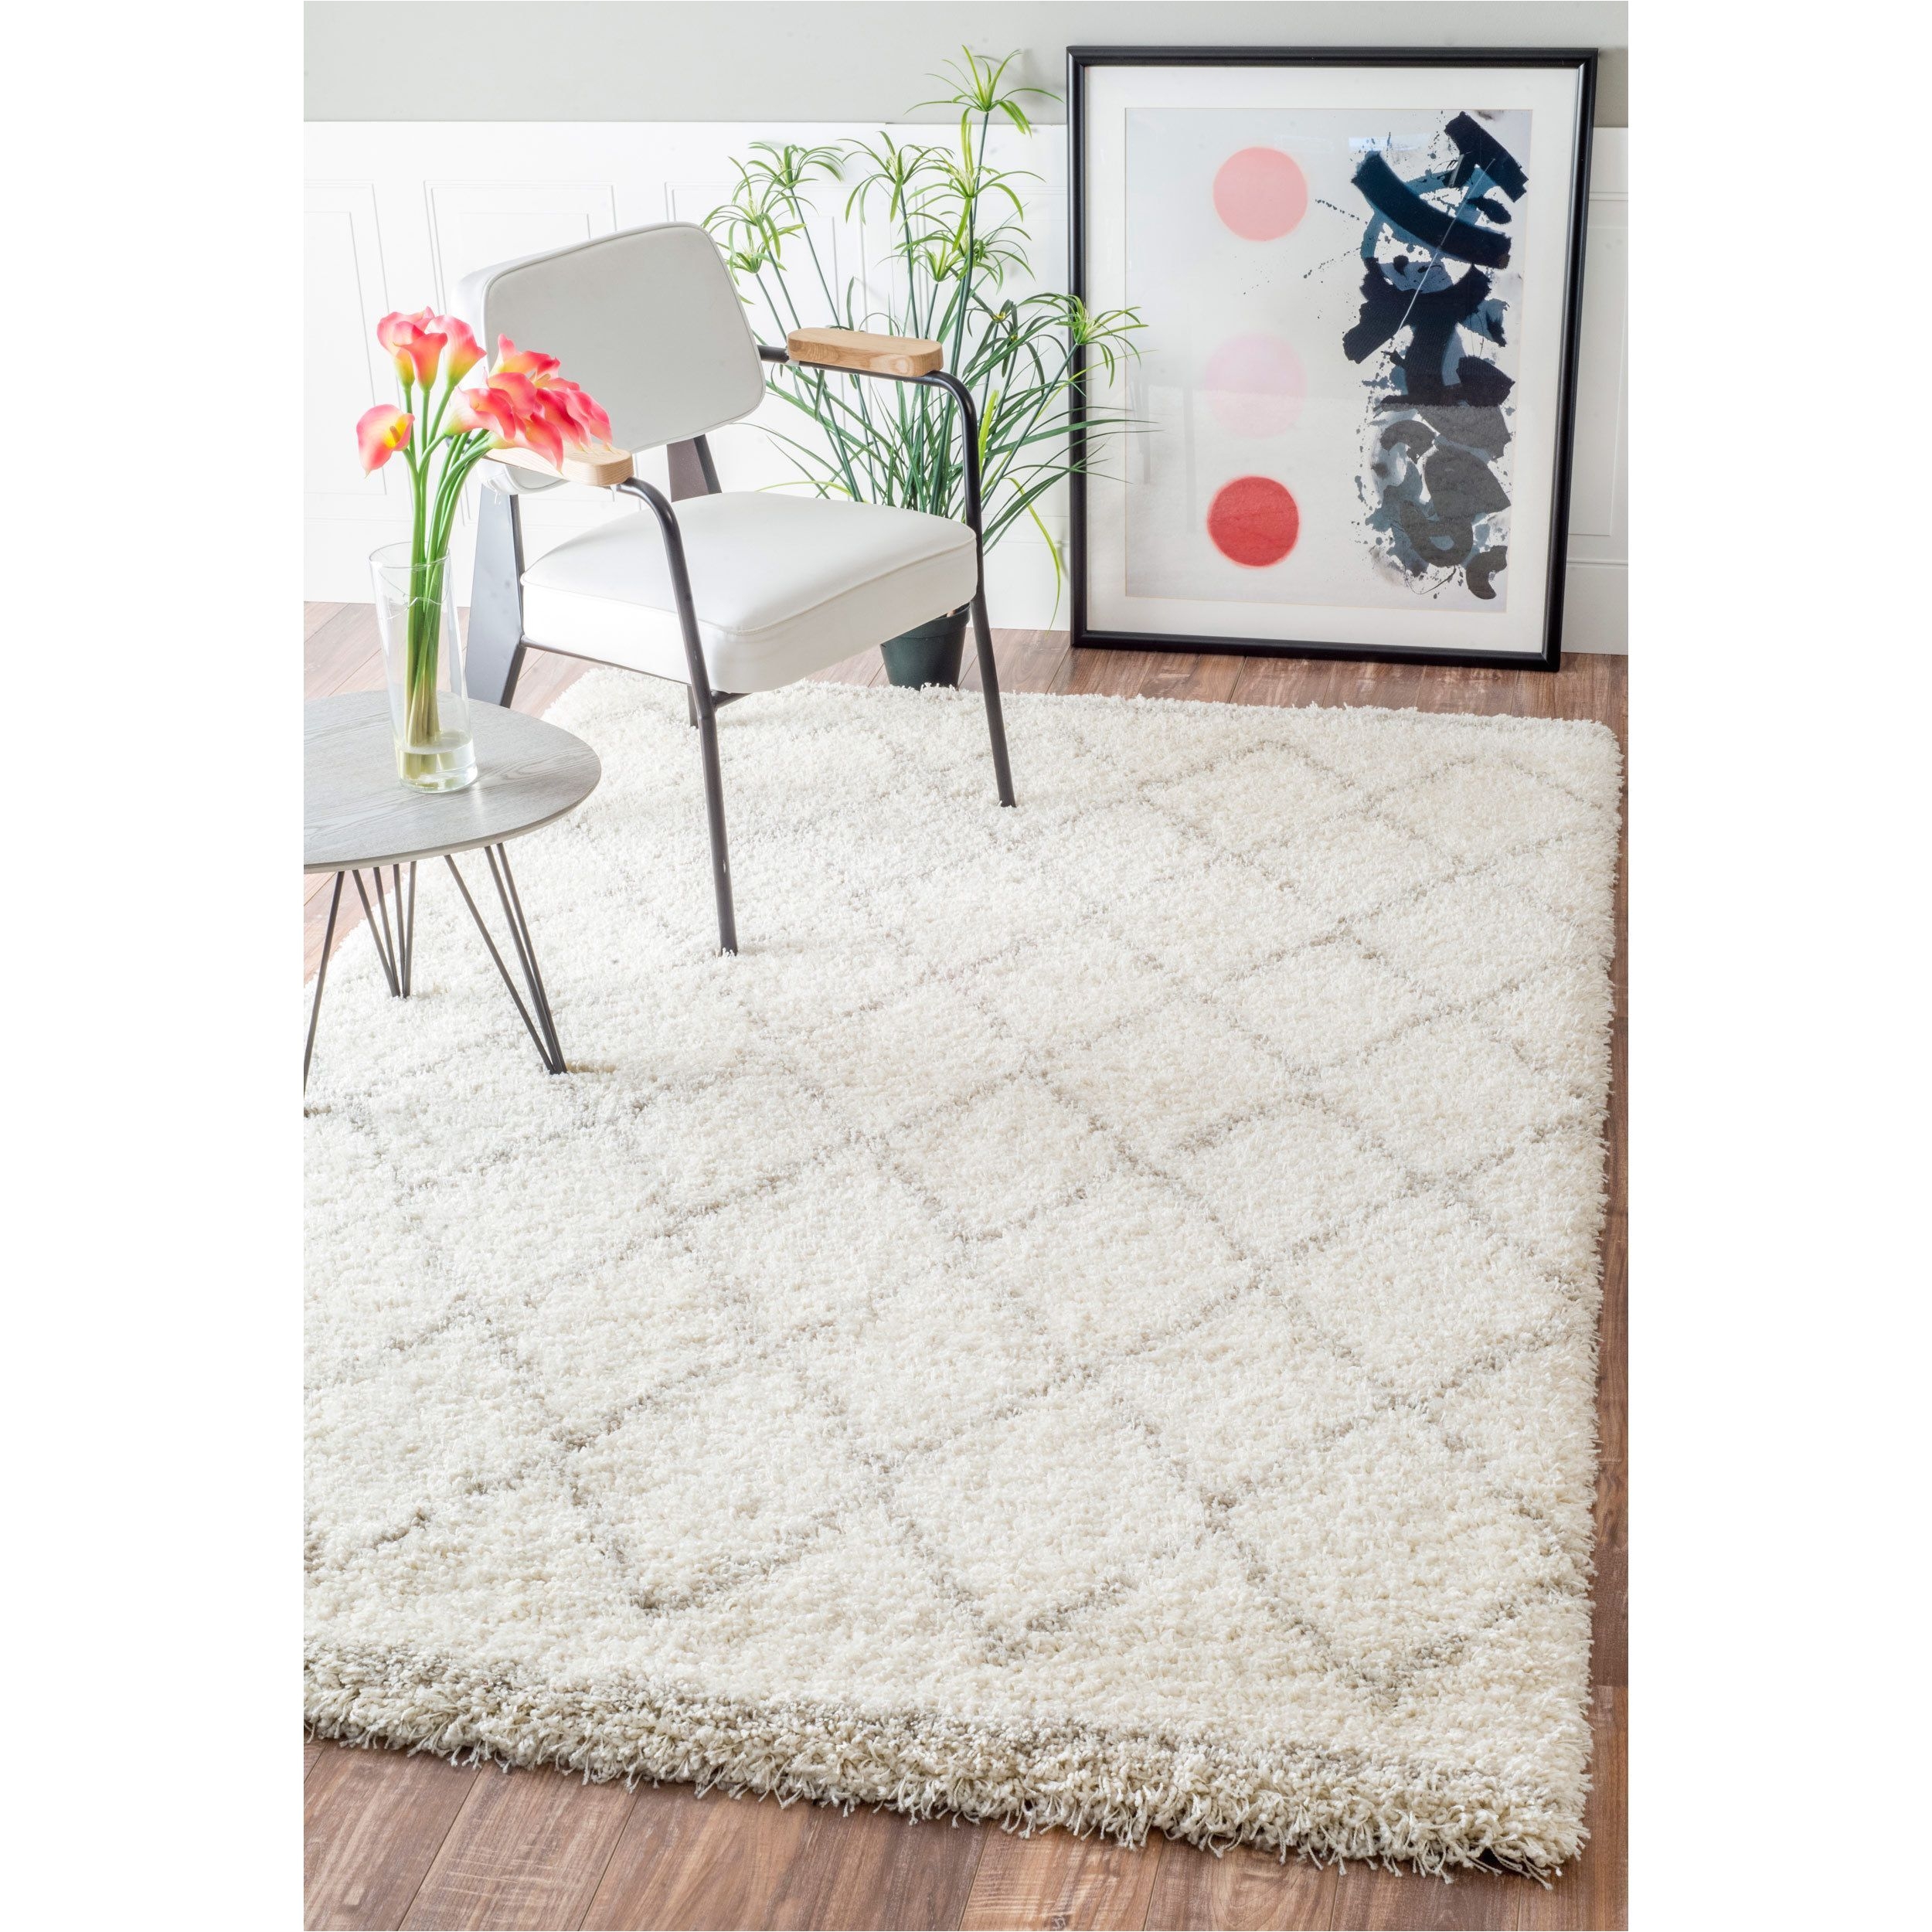 inspired by moroccan berber carpets this trellis shag rug adds depth to your decor made of polypropylene this soft and plush shag rug feels great under